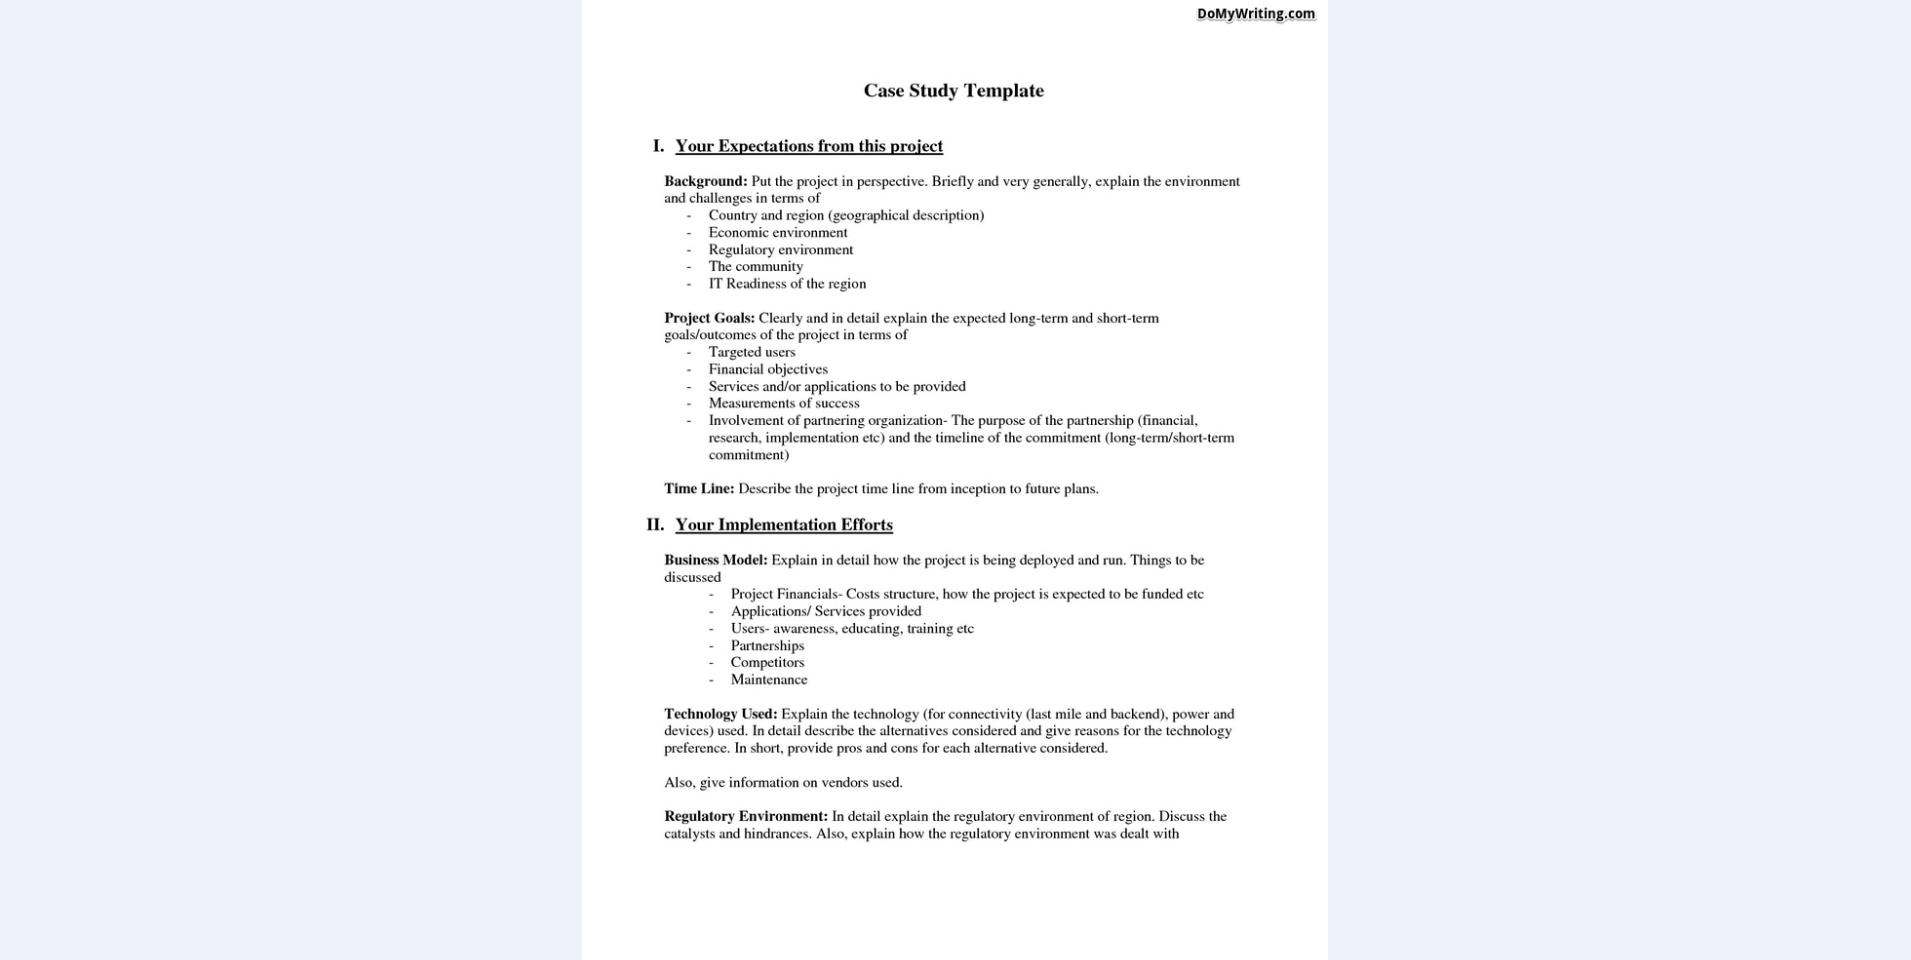 Psychology Case Study Template from domywriting.com